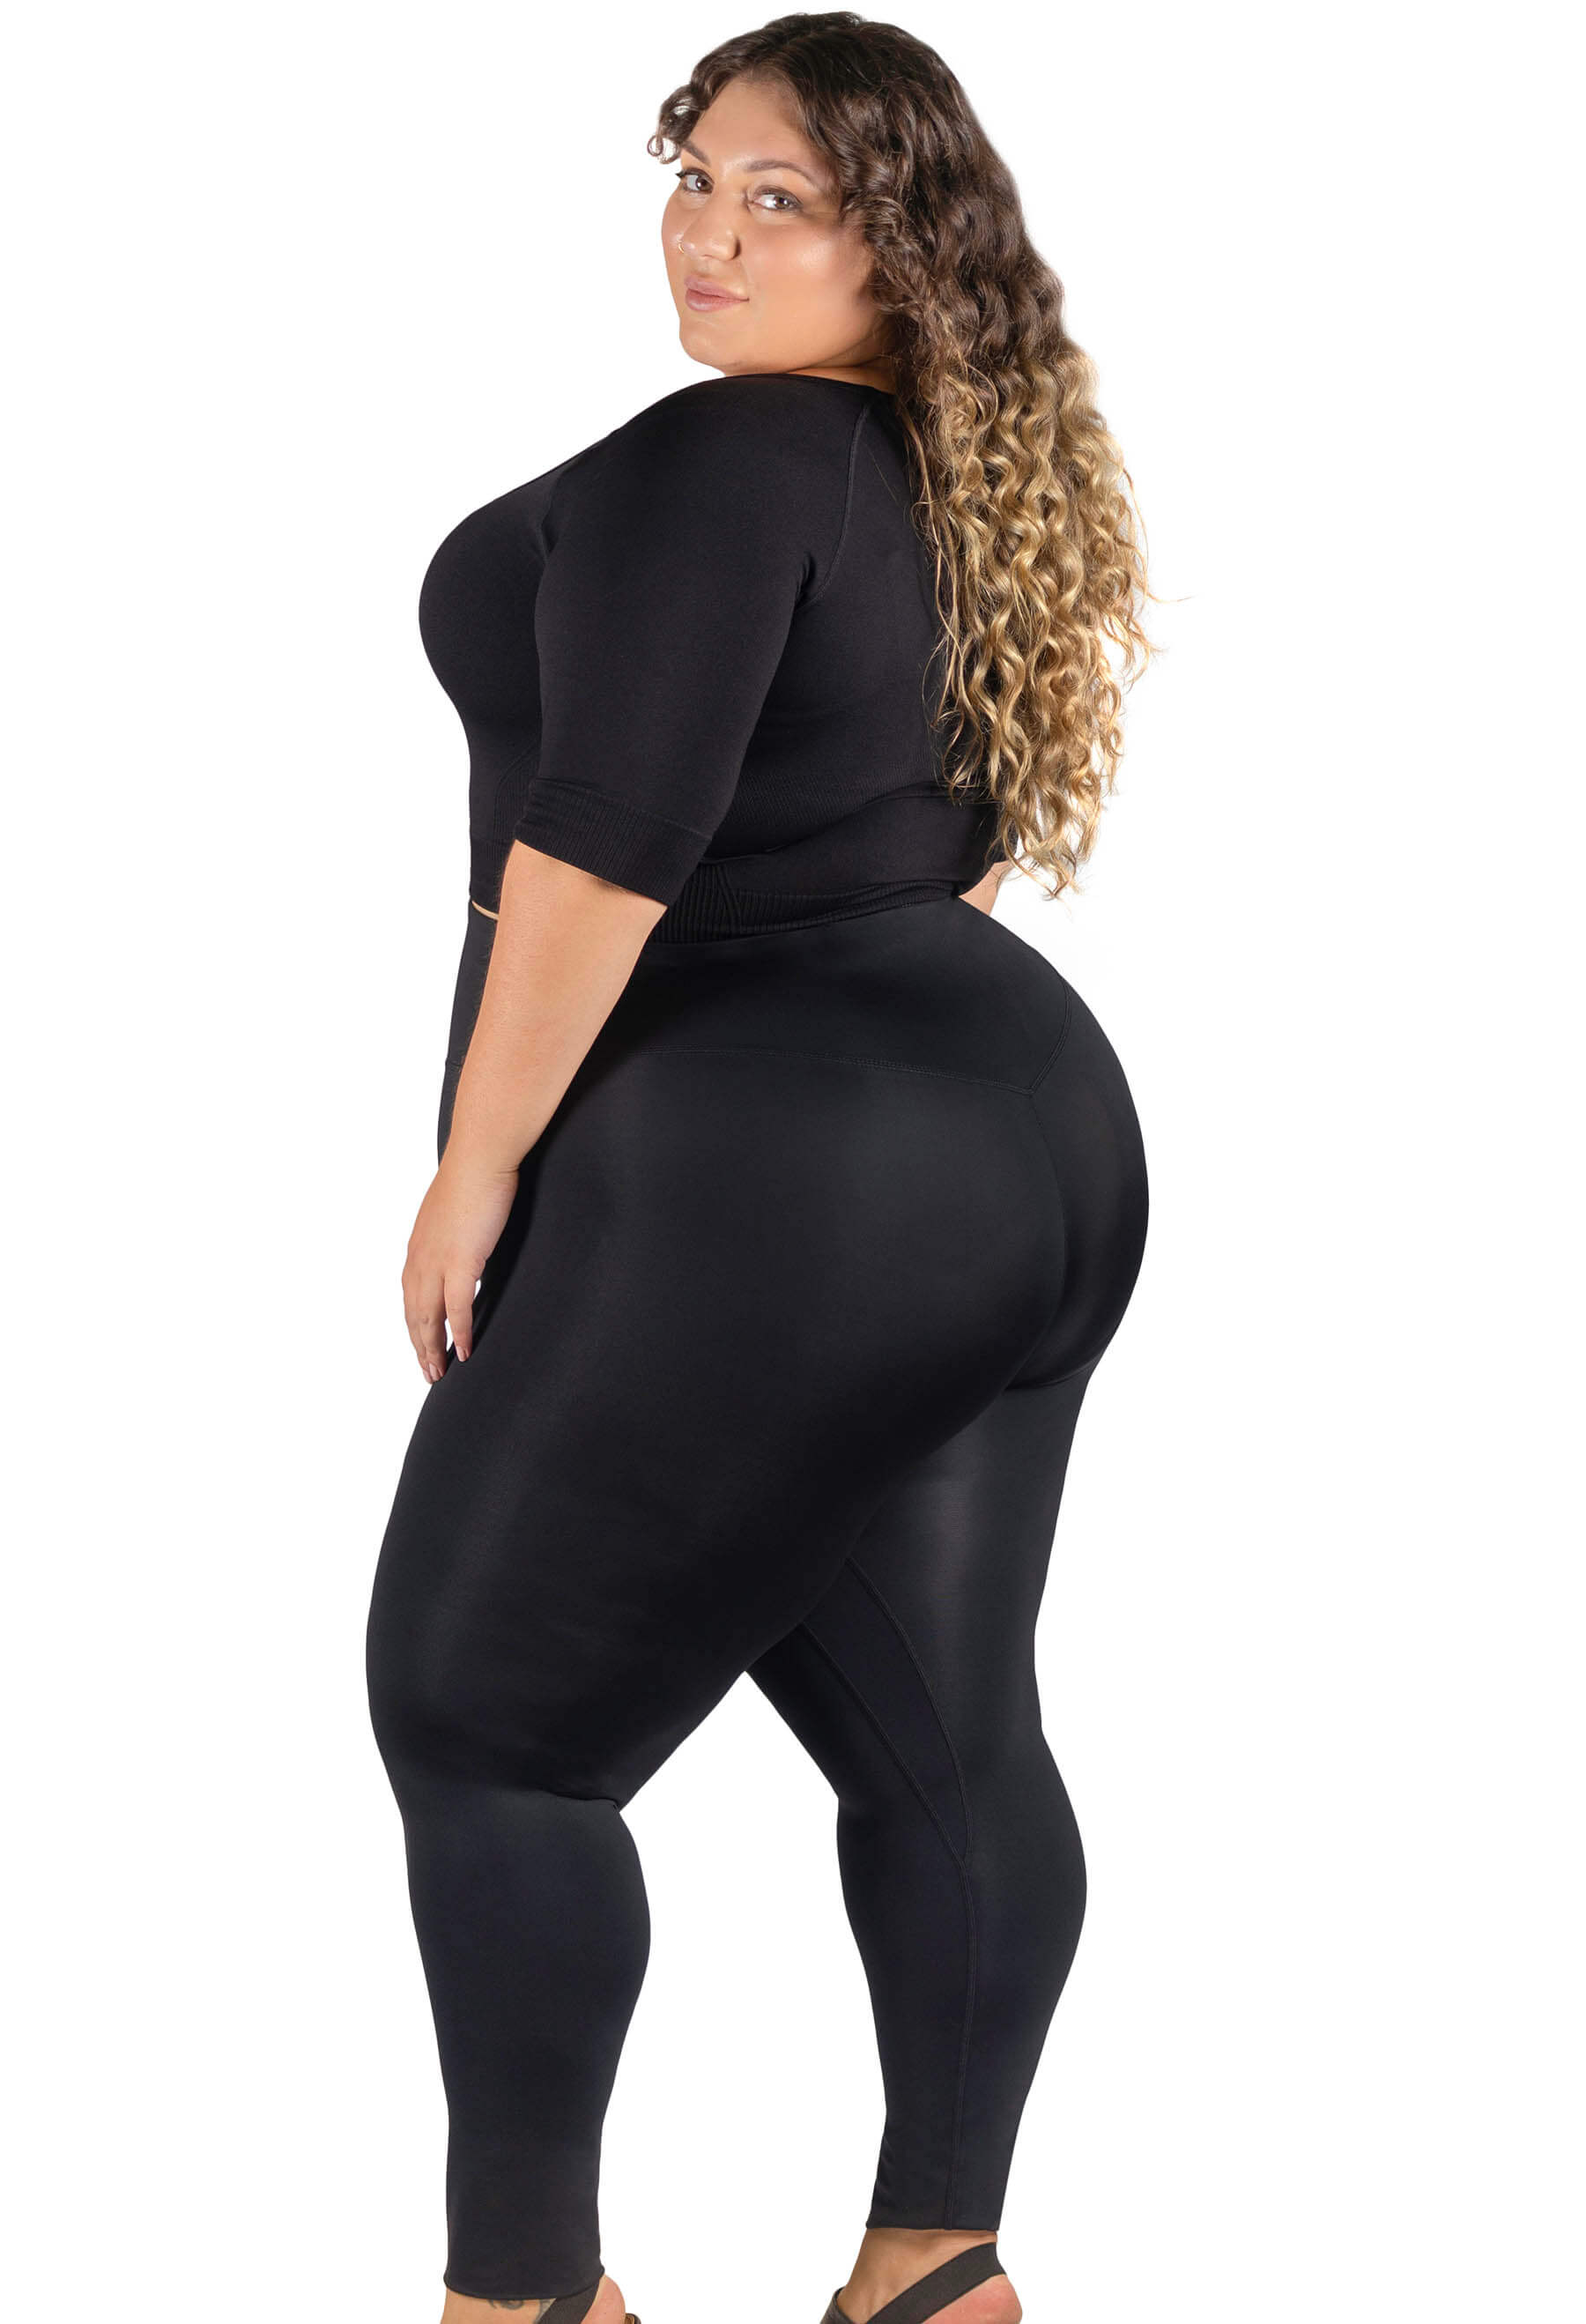 JD JEN-DAY Workout Leggings for Women Plus Sizes high Waist Gym Pants  Non-See-Through with 2 Pockets to Place Your Phone Black at  Women's  Clothing store